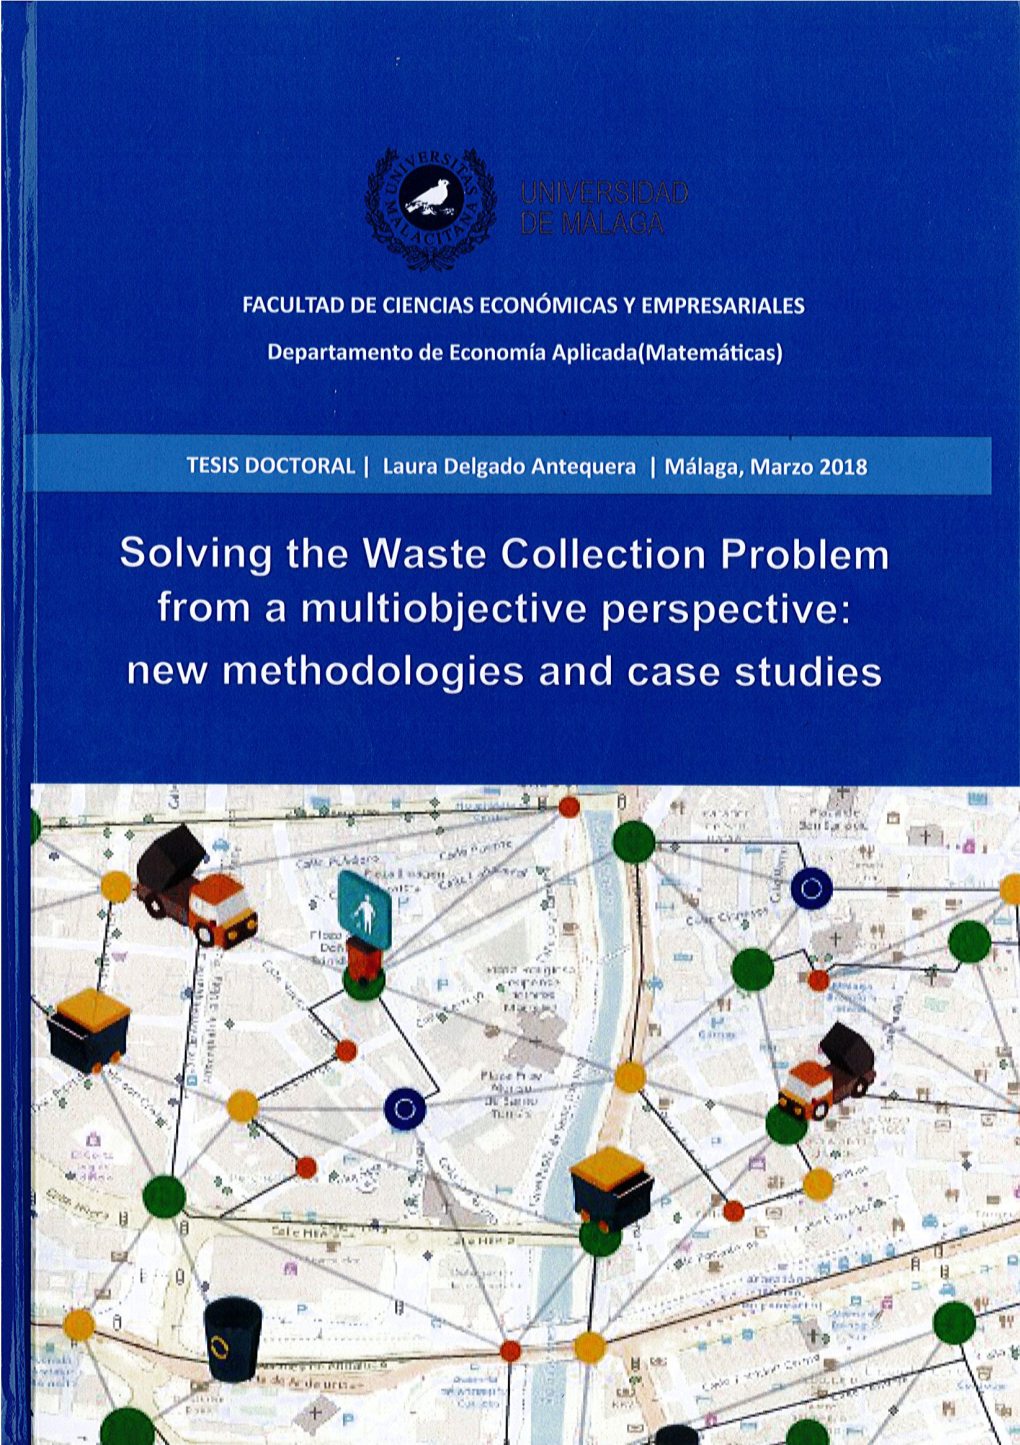 Solving the Waste Collection Problem from a Multiobjective Perspective: New Methodologies and Case Studies